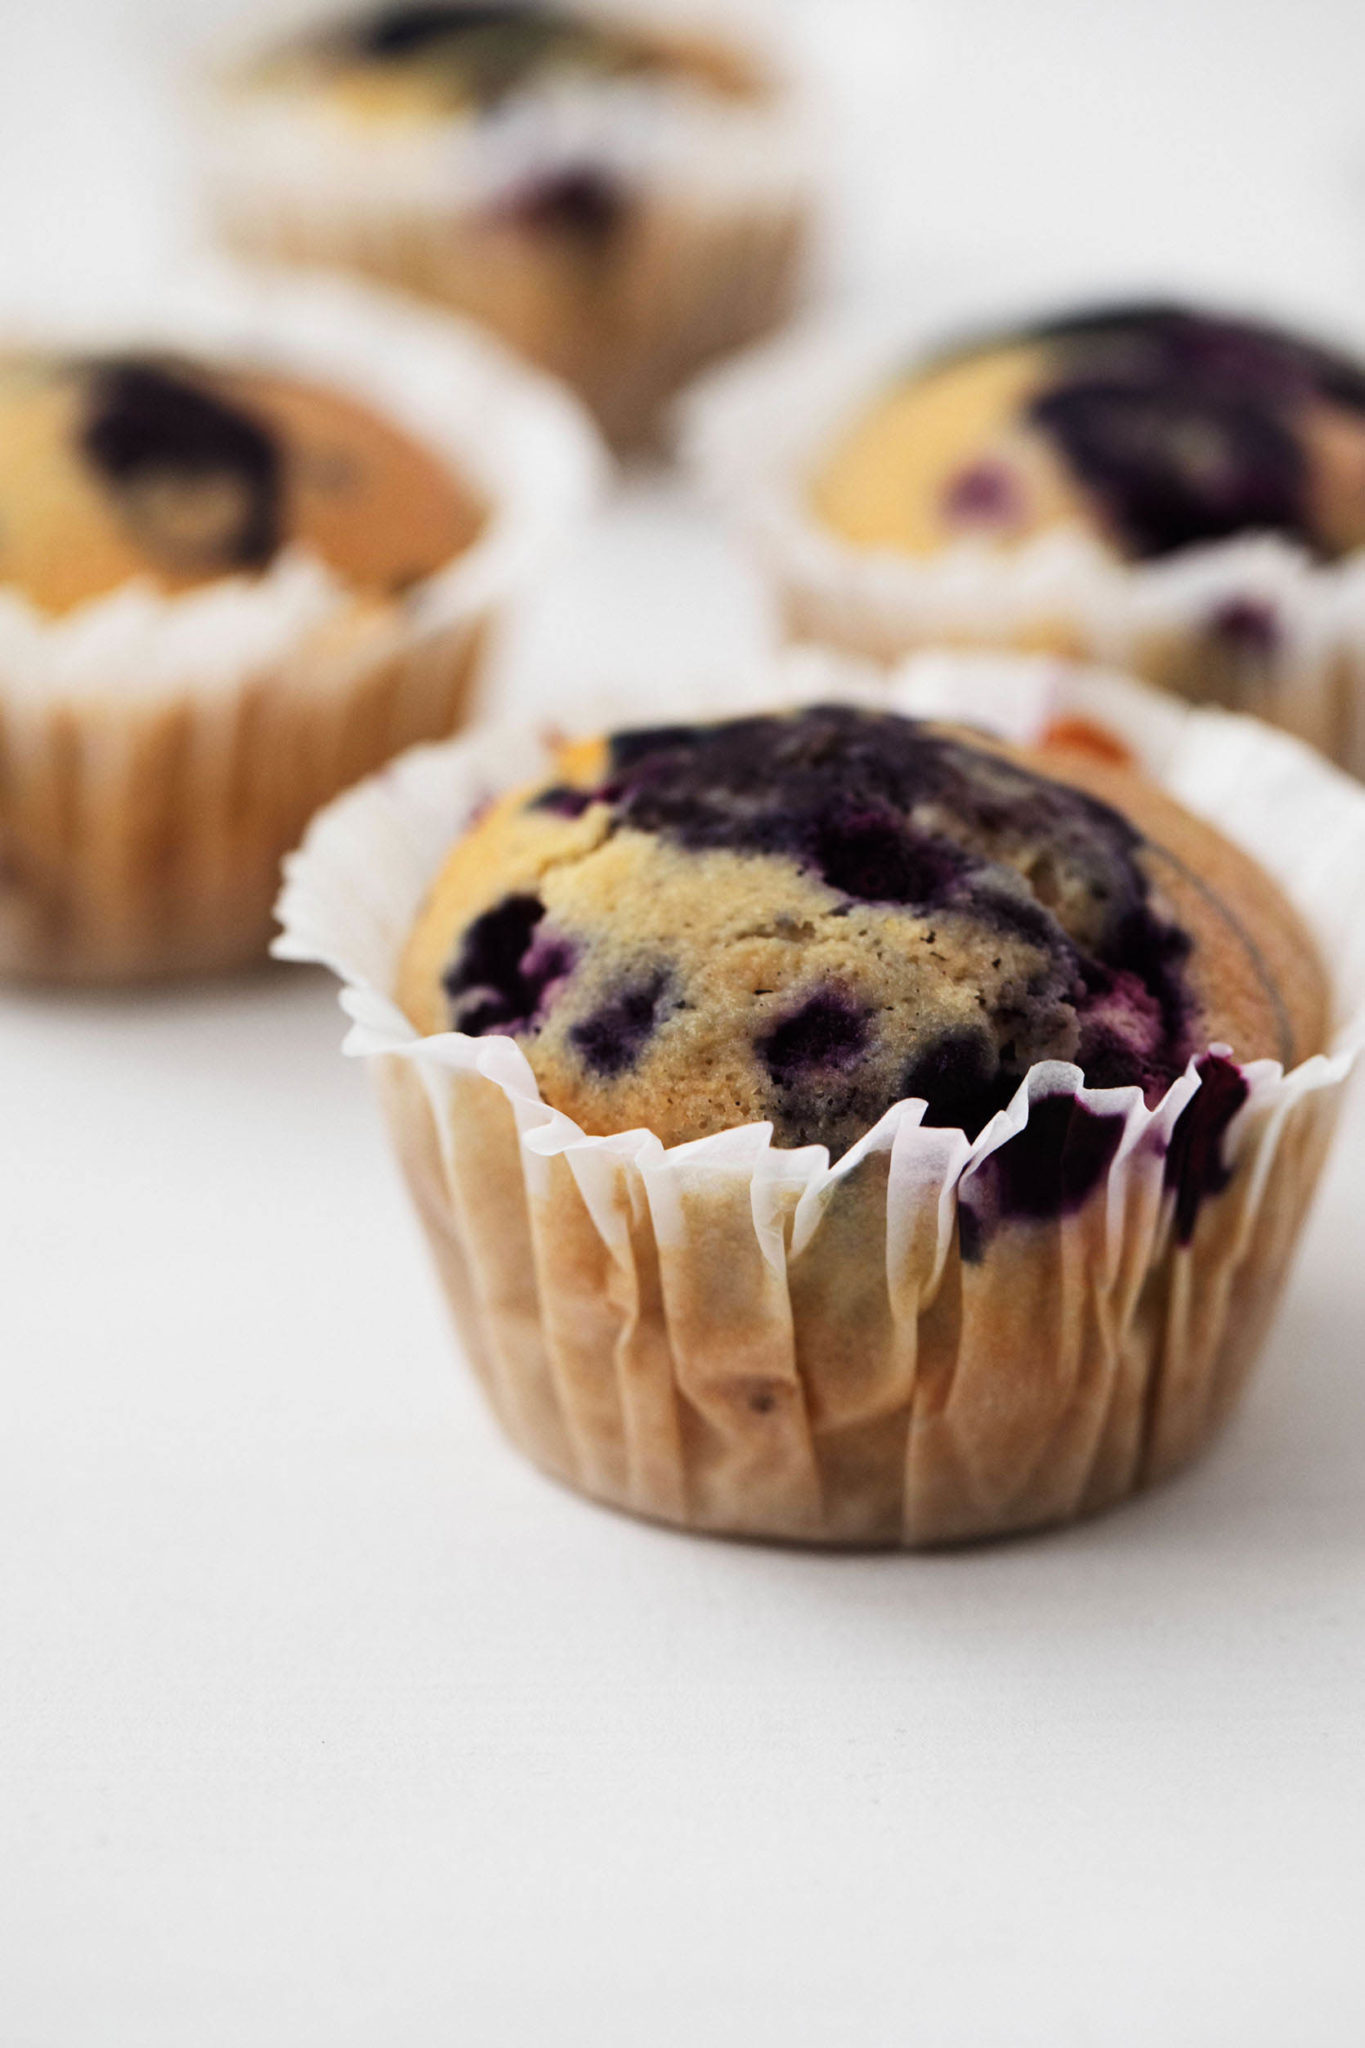 Simple Vegan Blueberry Corn Muffins | The Full Helping